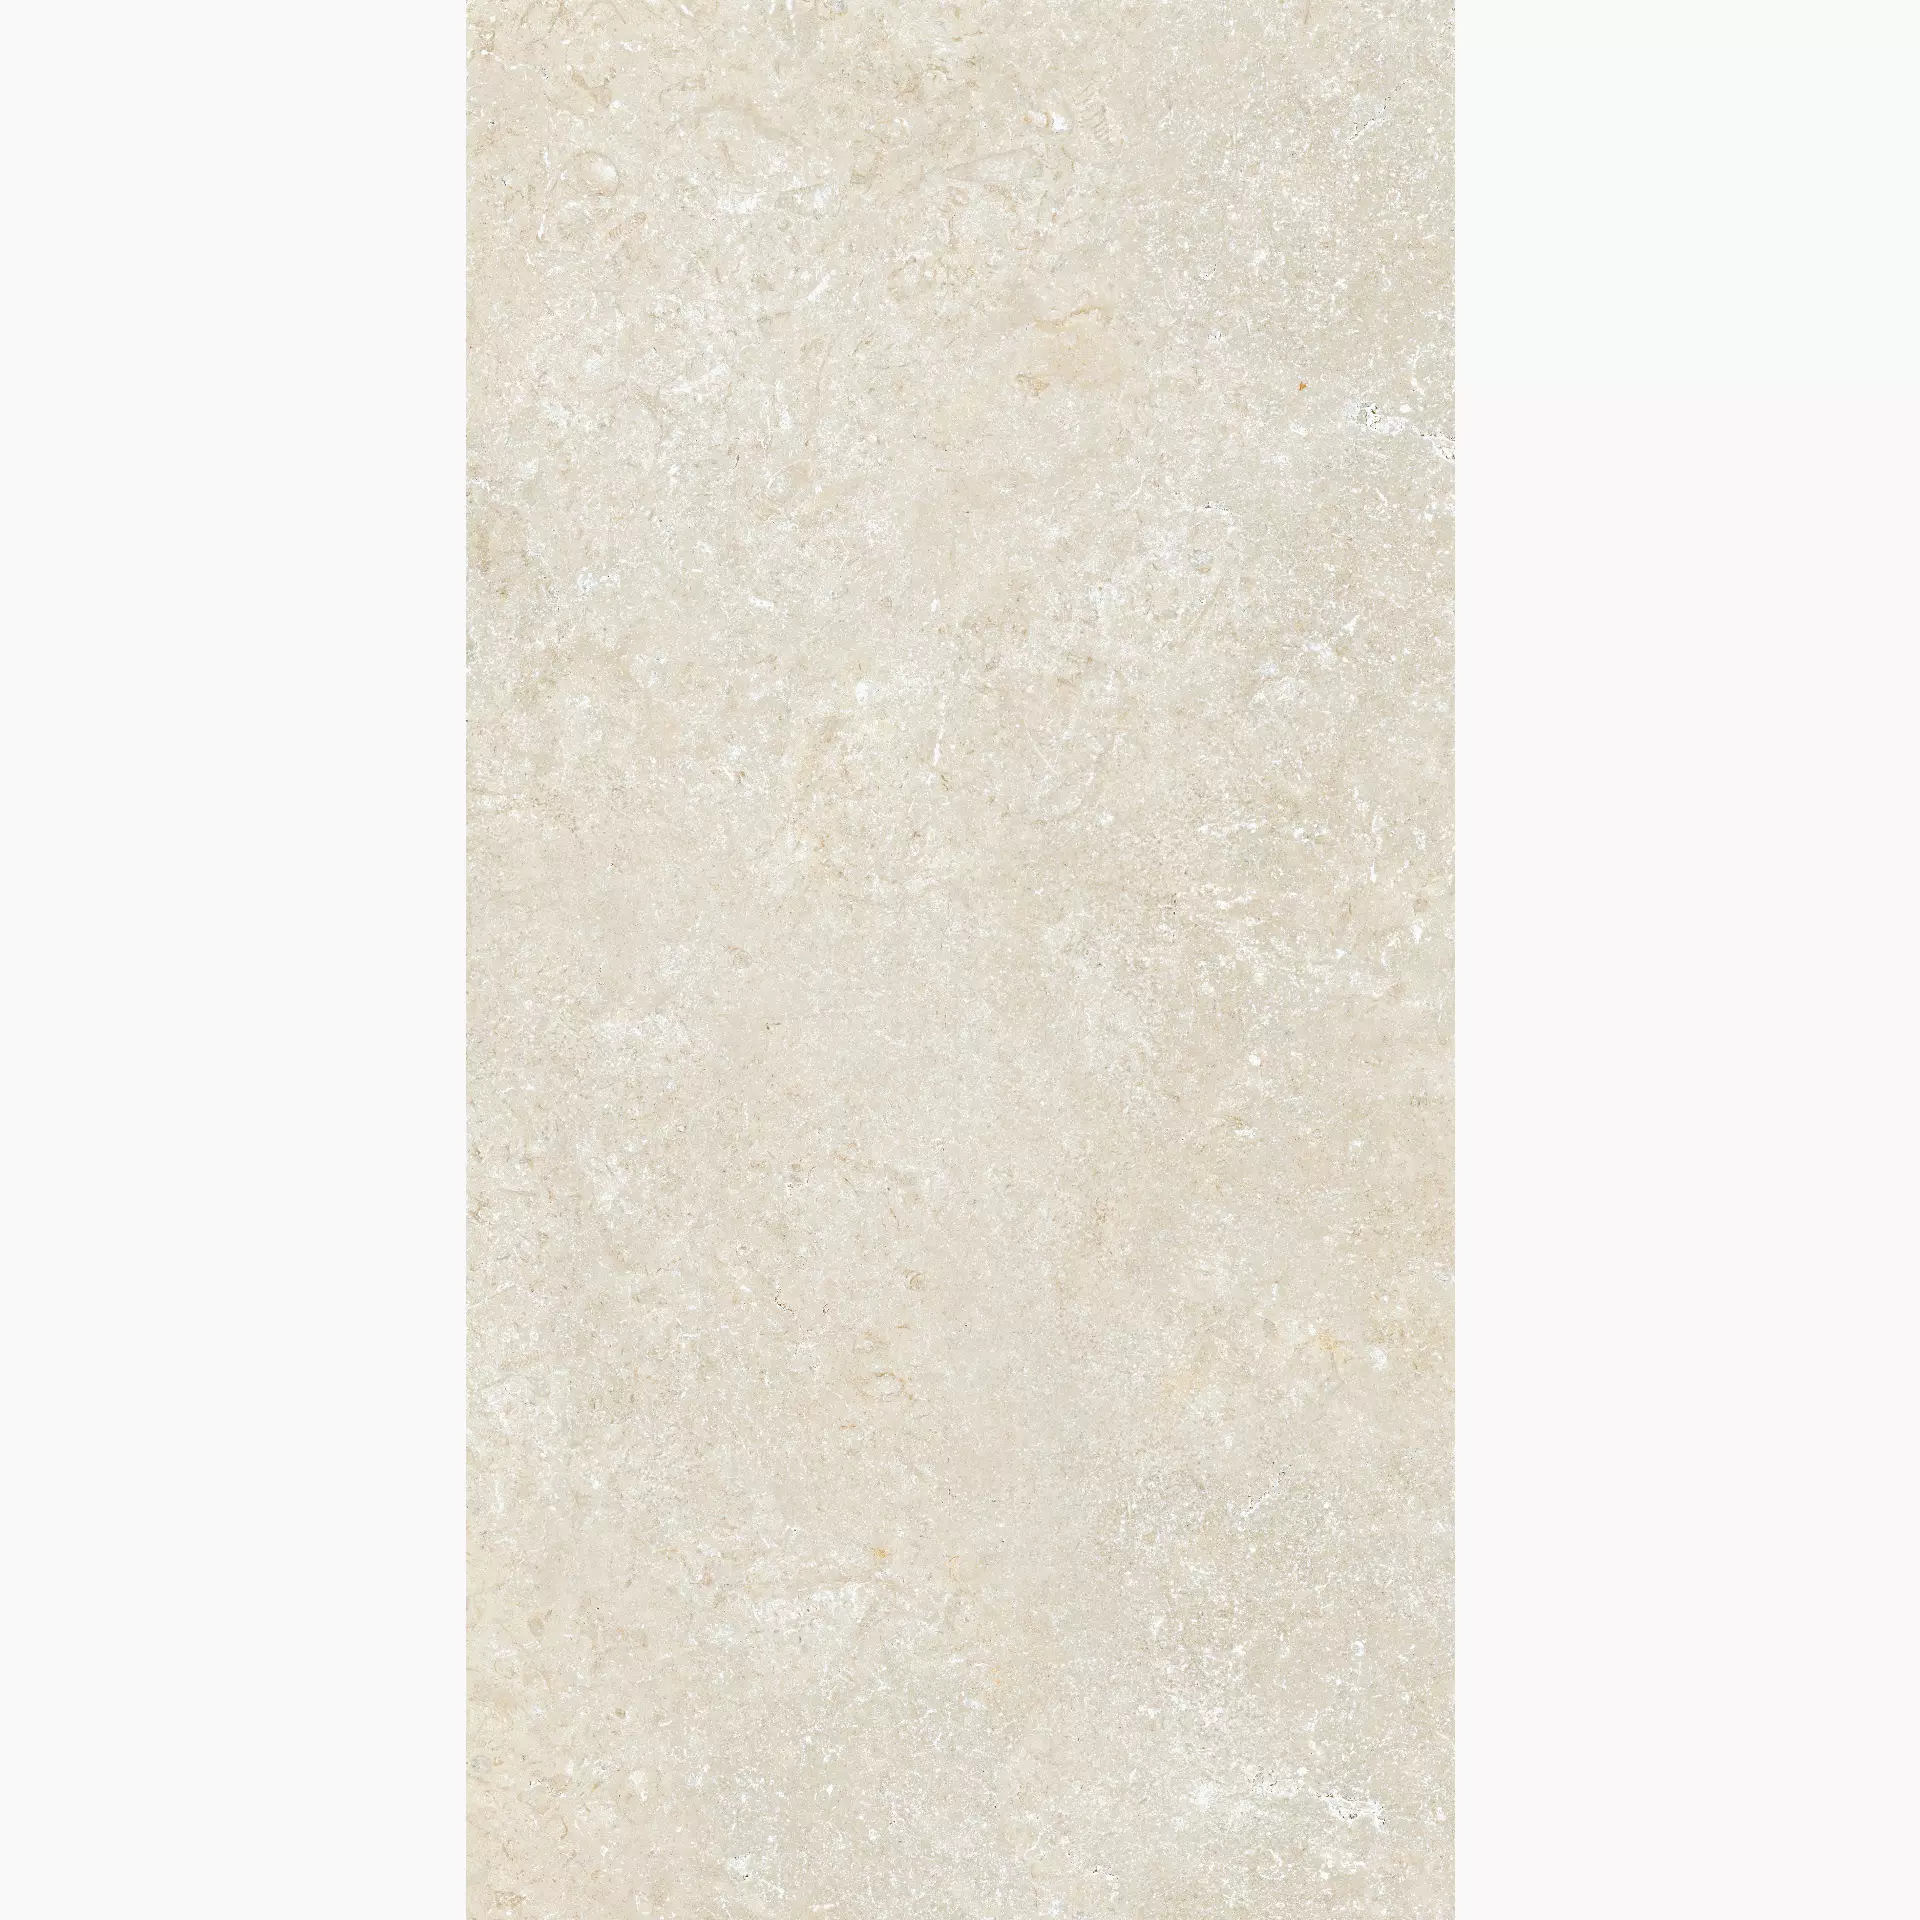 Cottodeste Secret Stone Mystery White Naturale Protect EGXSS00 60x120cm rectified 14mm